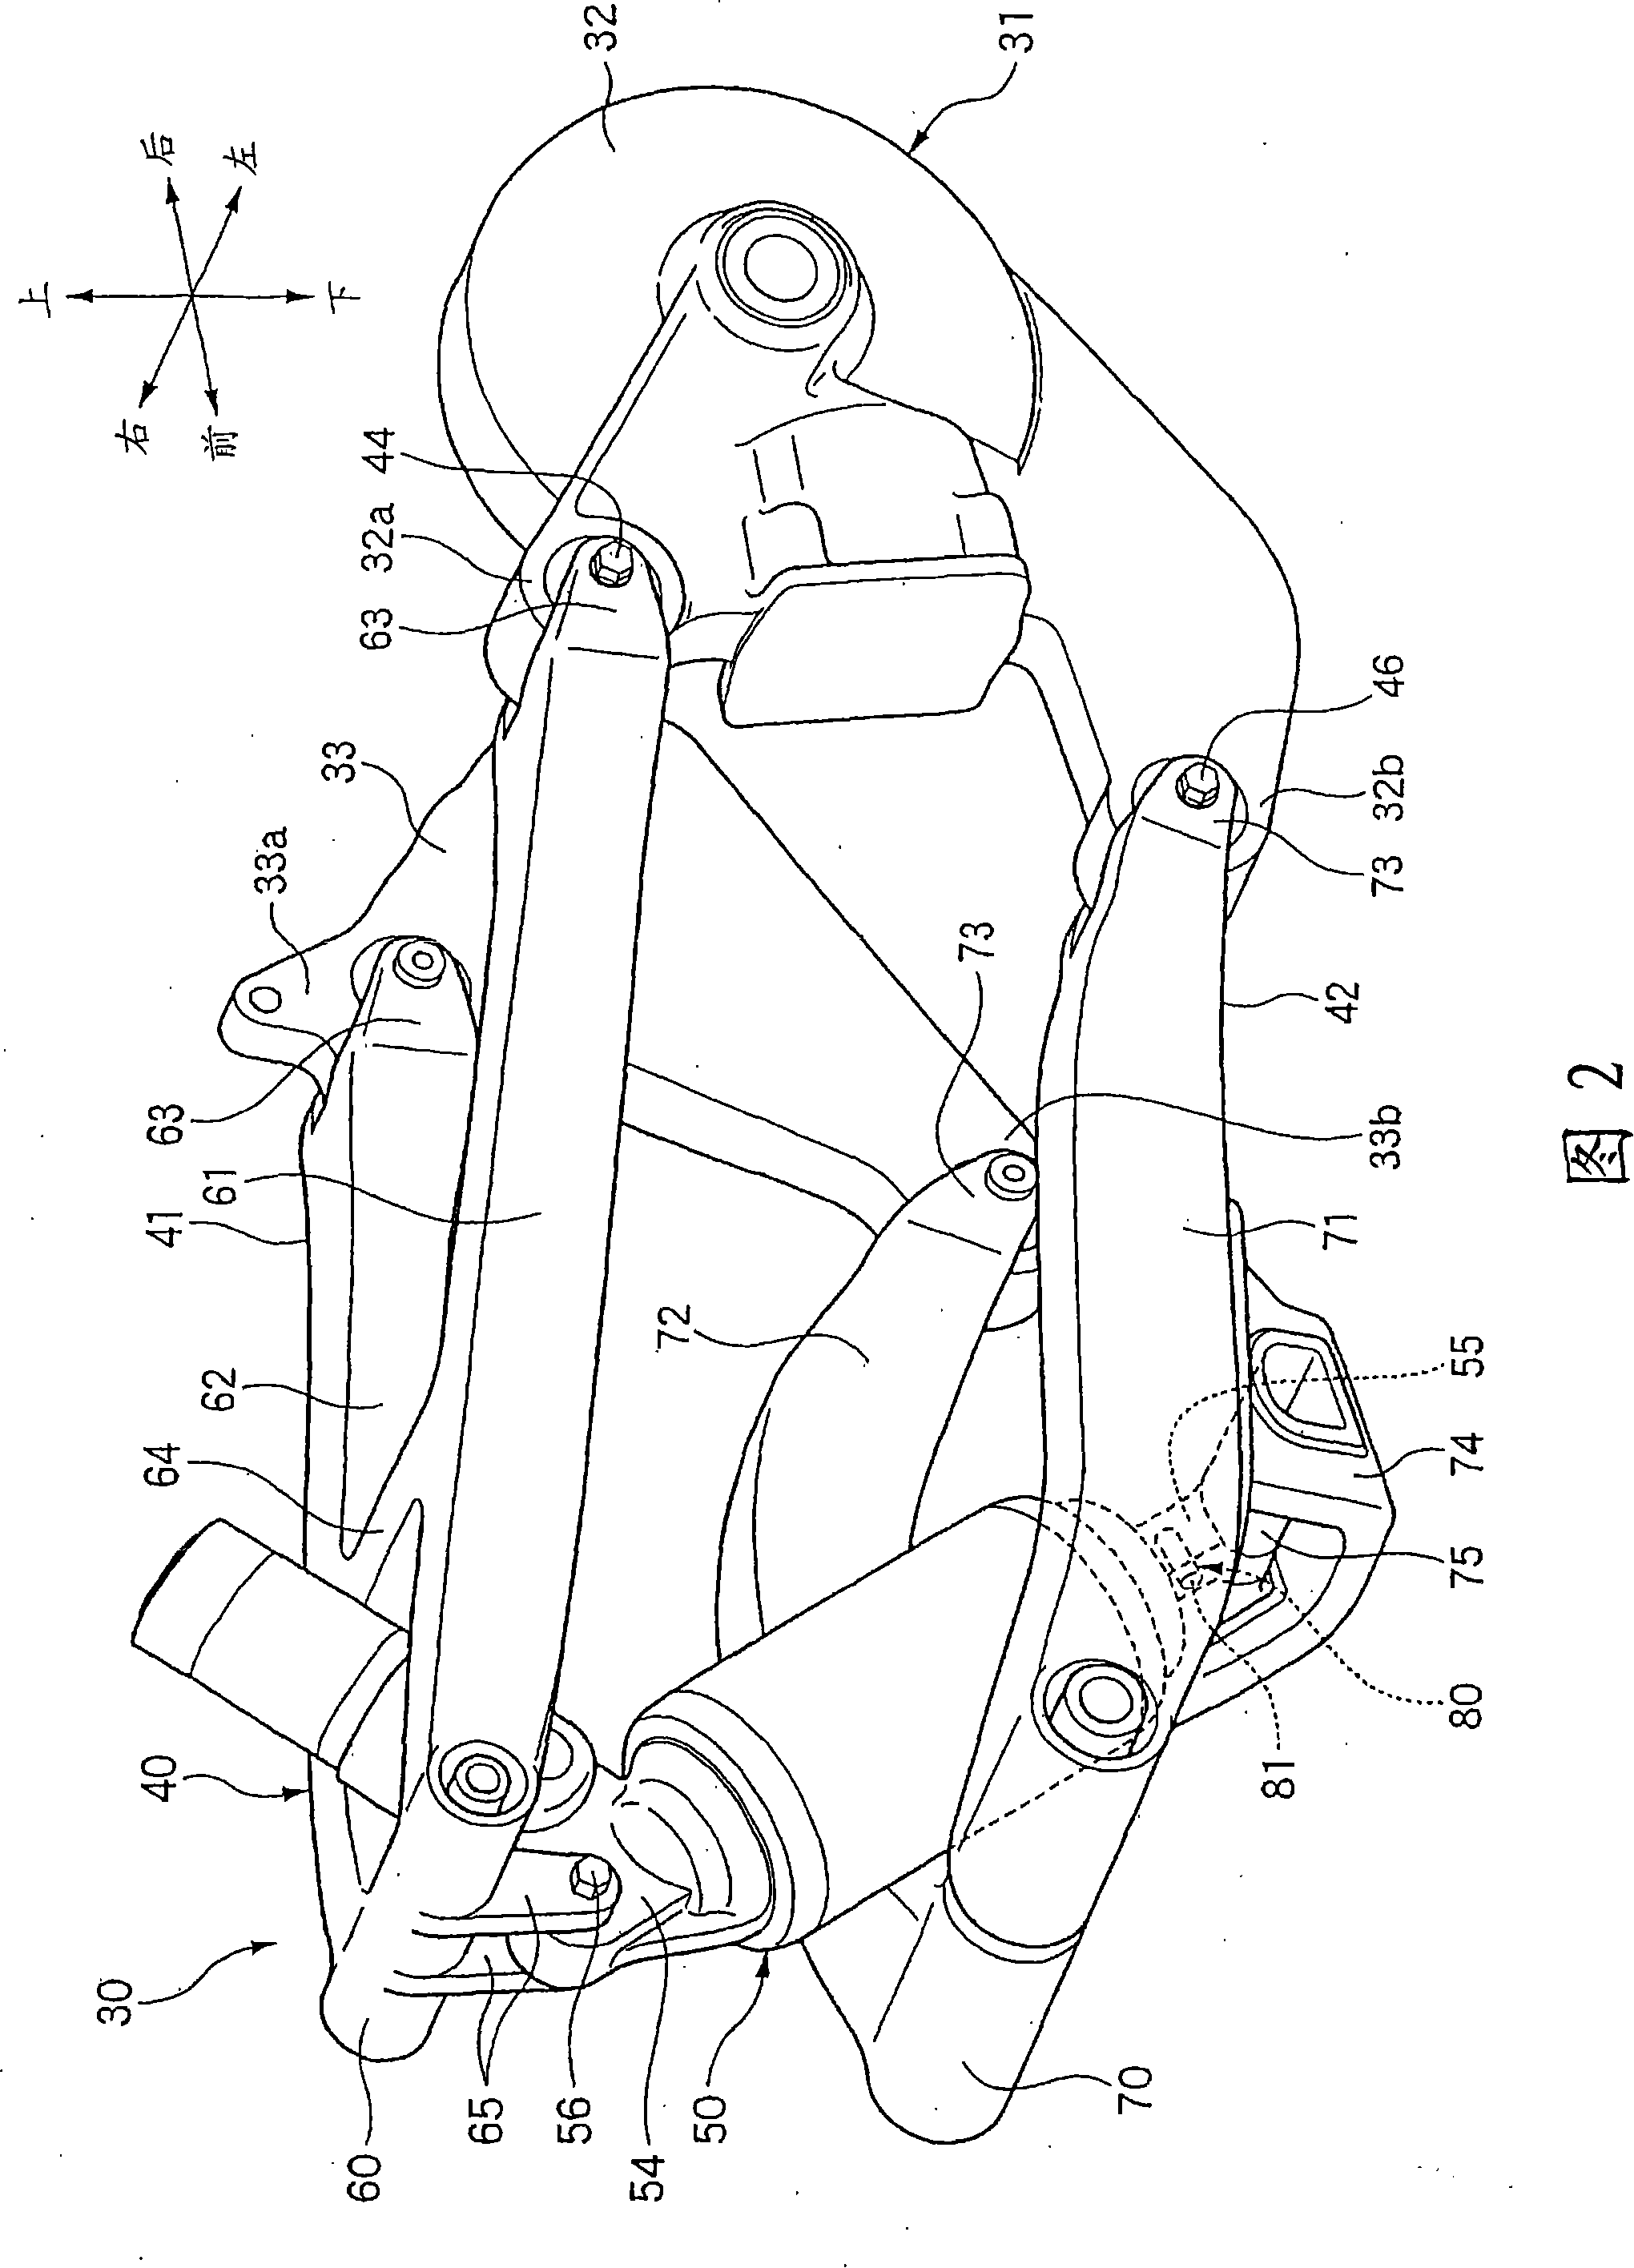 Rear wheel suspension for a motorcycle